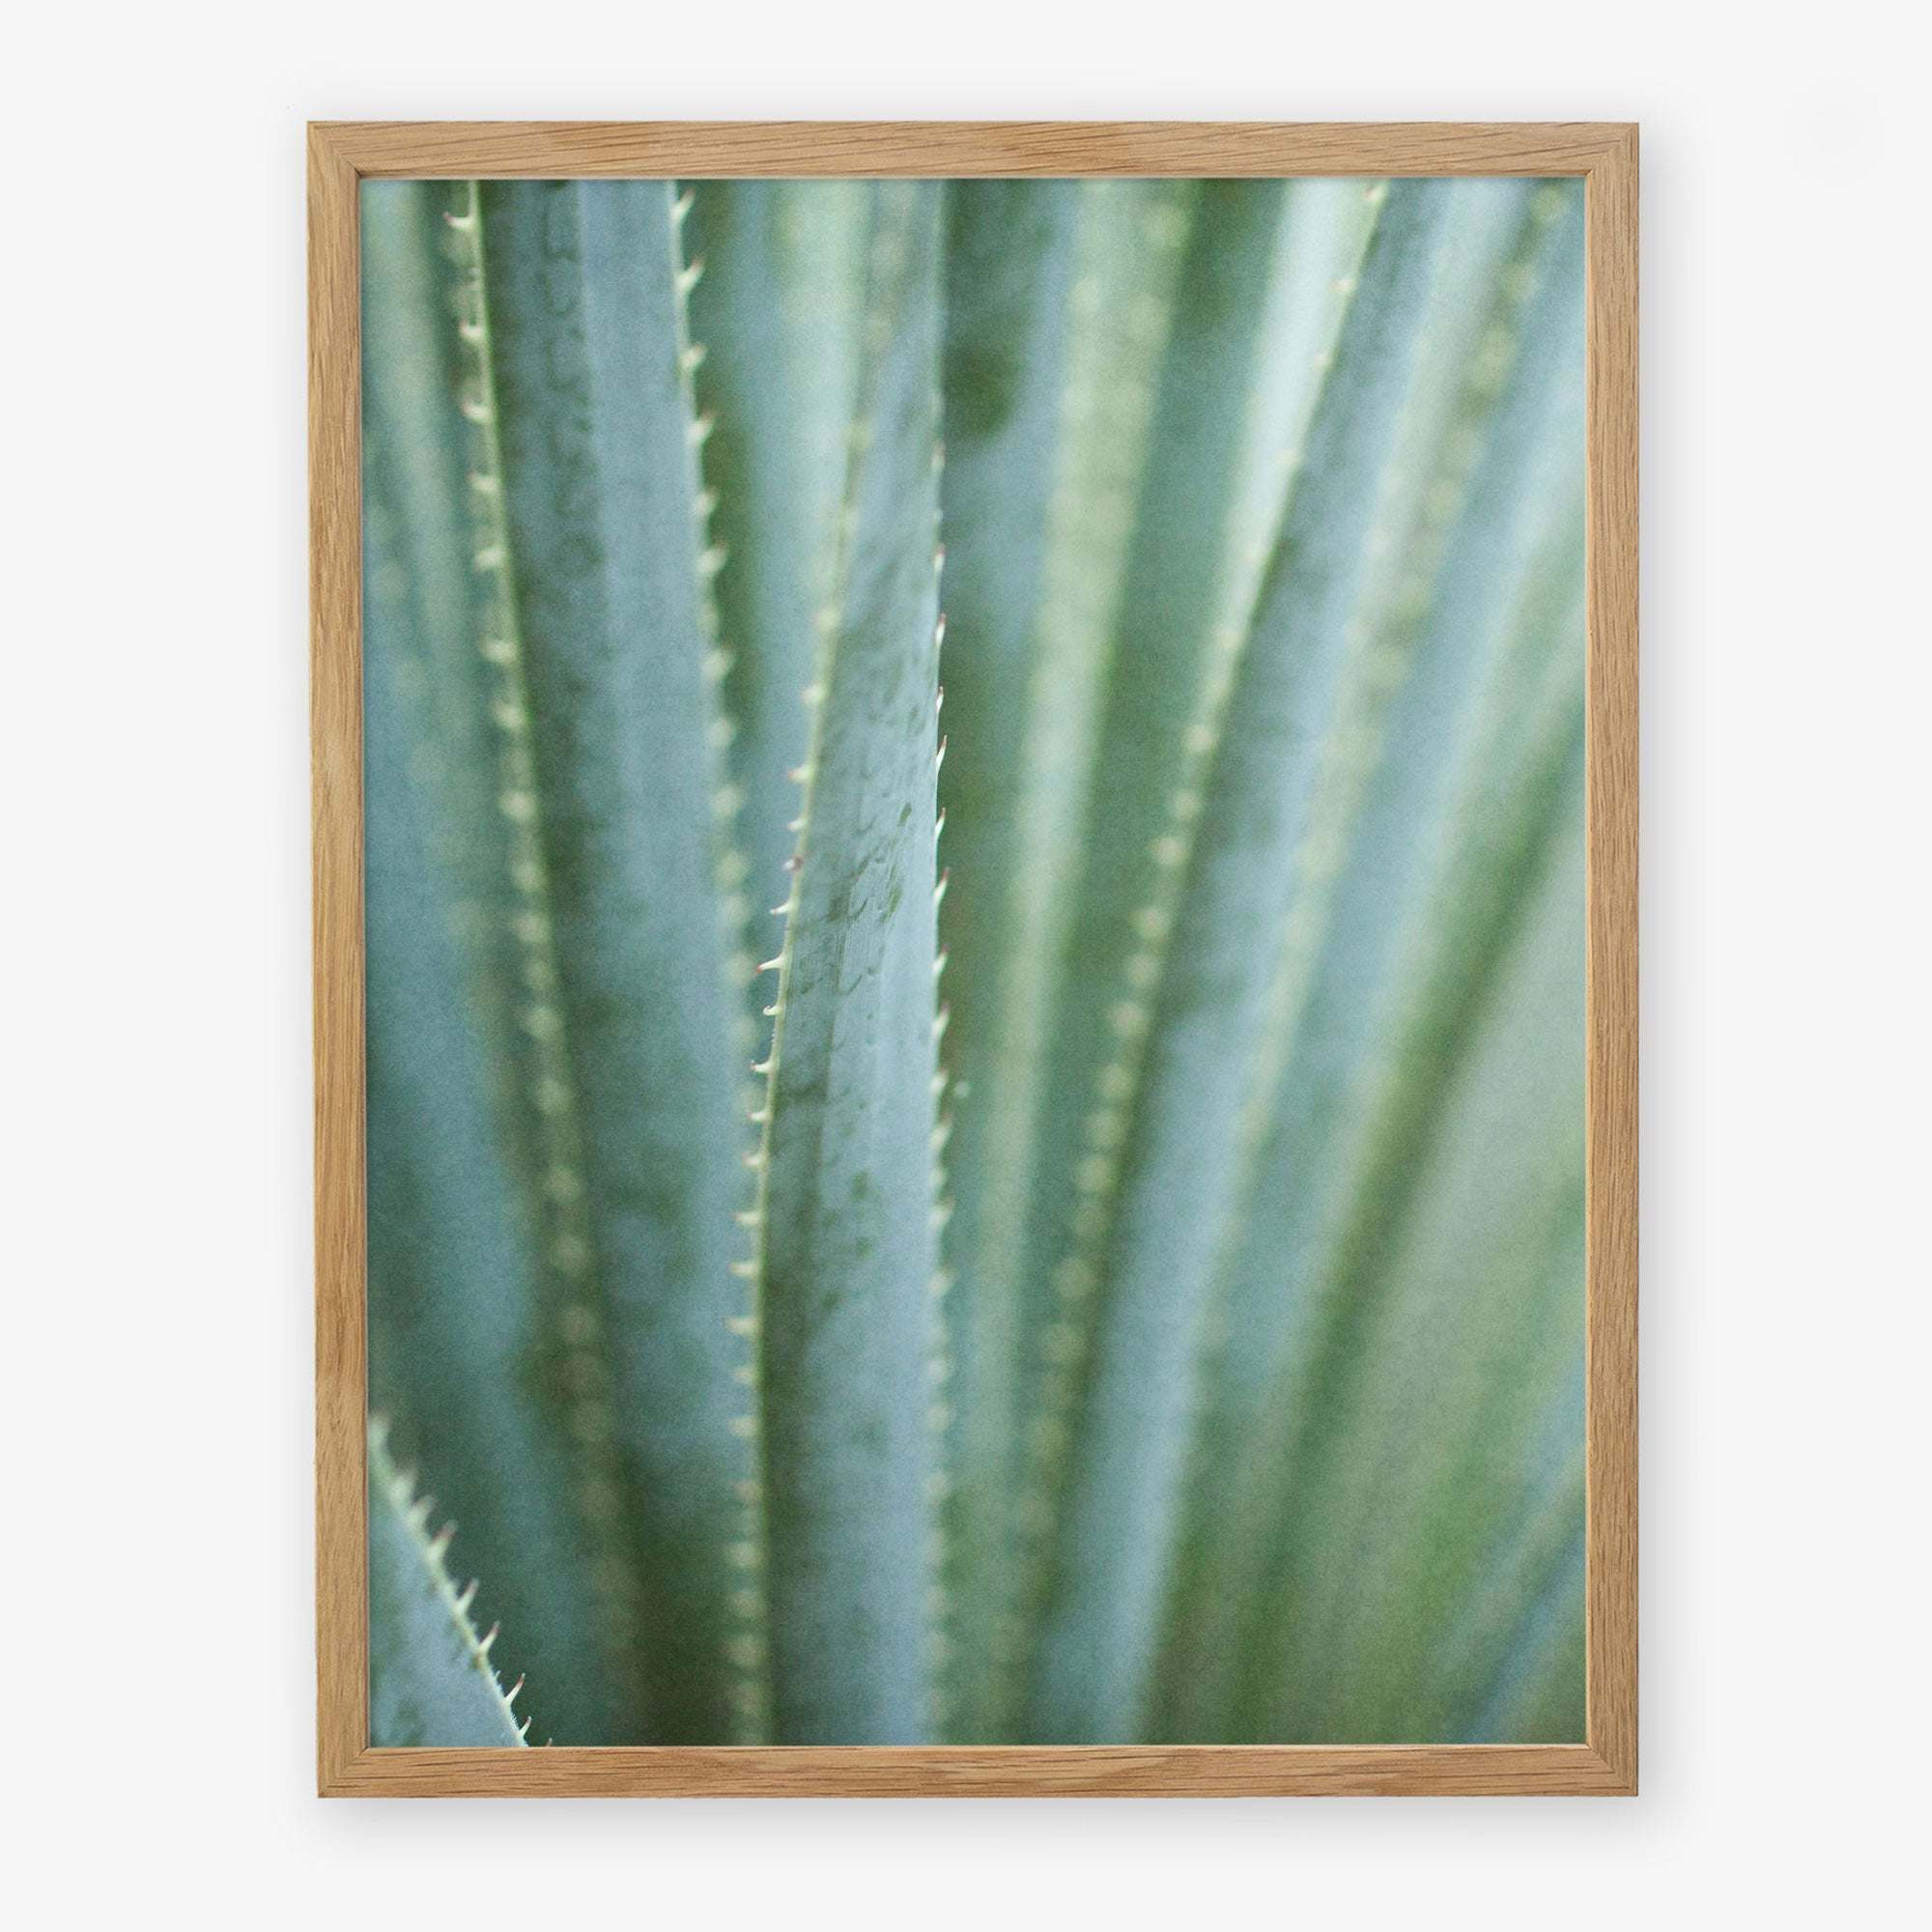 A close-up photograph of a green agave plant with sharp edges, printed on archival photographic paper as the Green Botanical Print &#39;Strands and Spikes II&#39; by Offley Green, and displayed against a plain background.